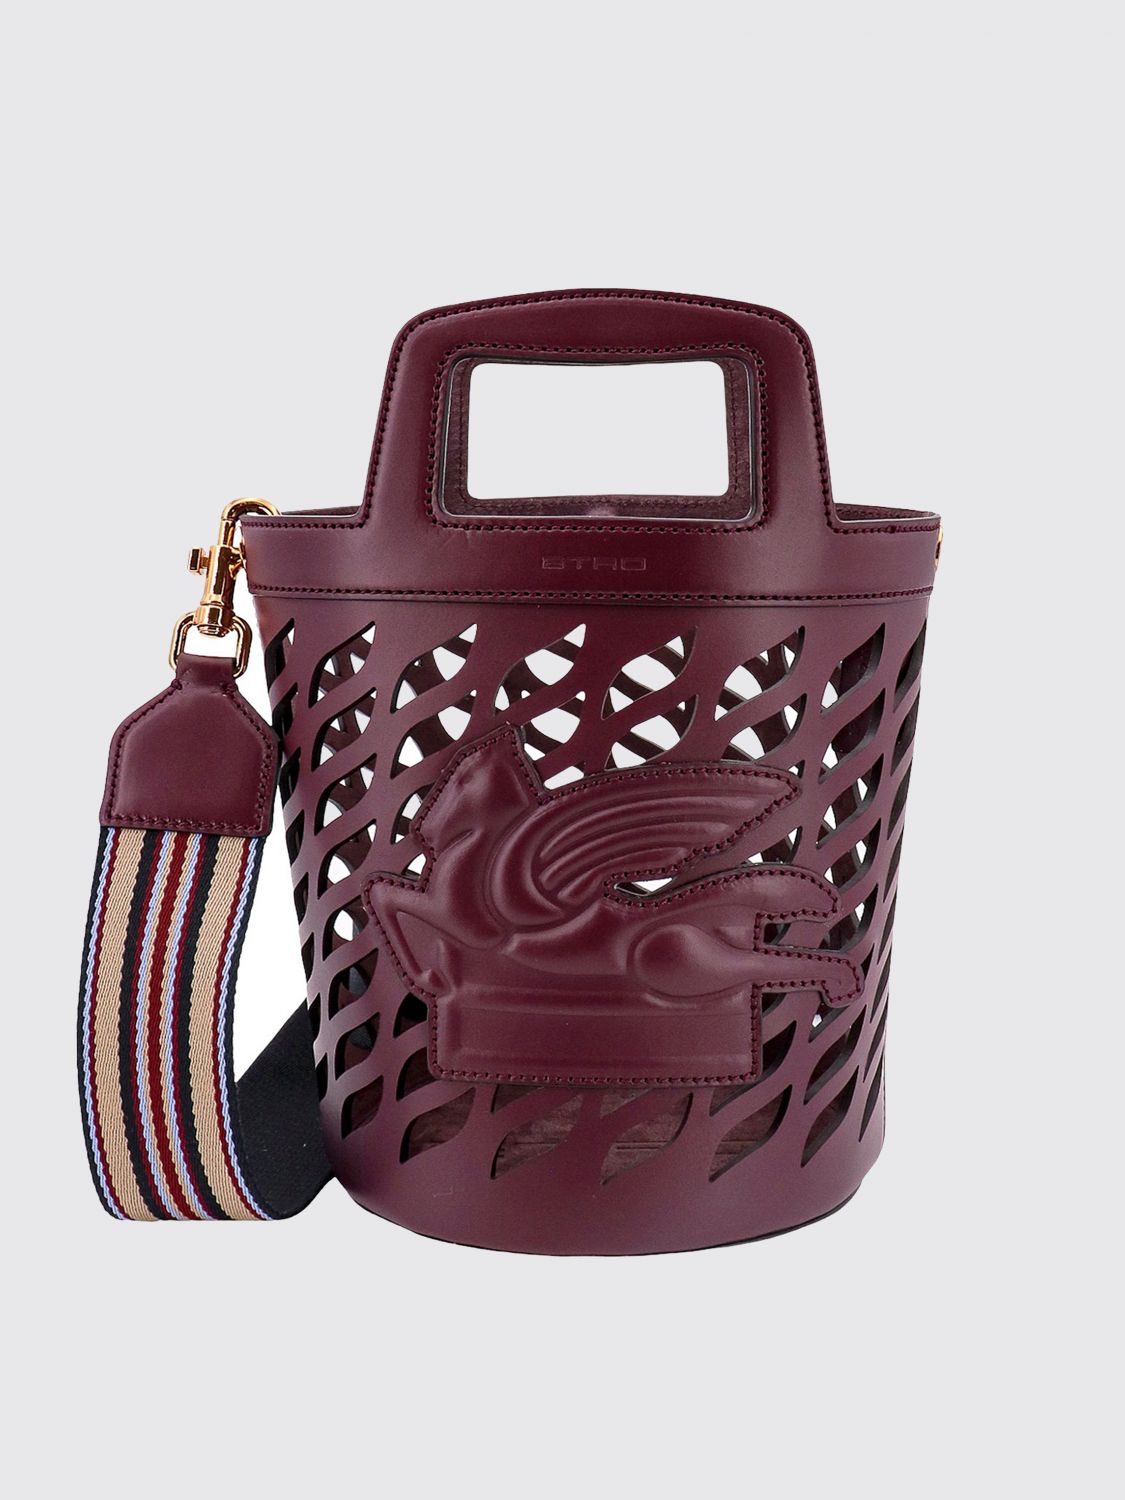 Etro Bag In Perforated Leather In Wine